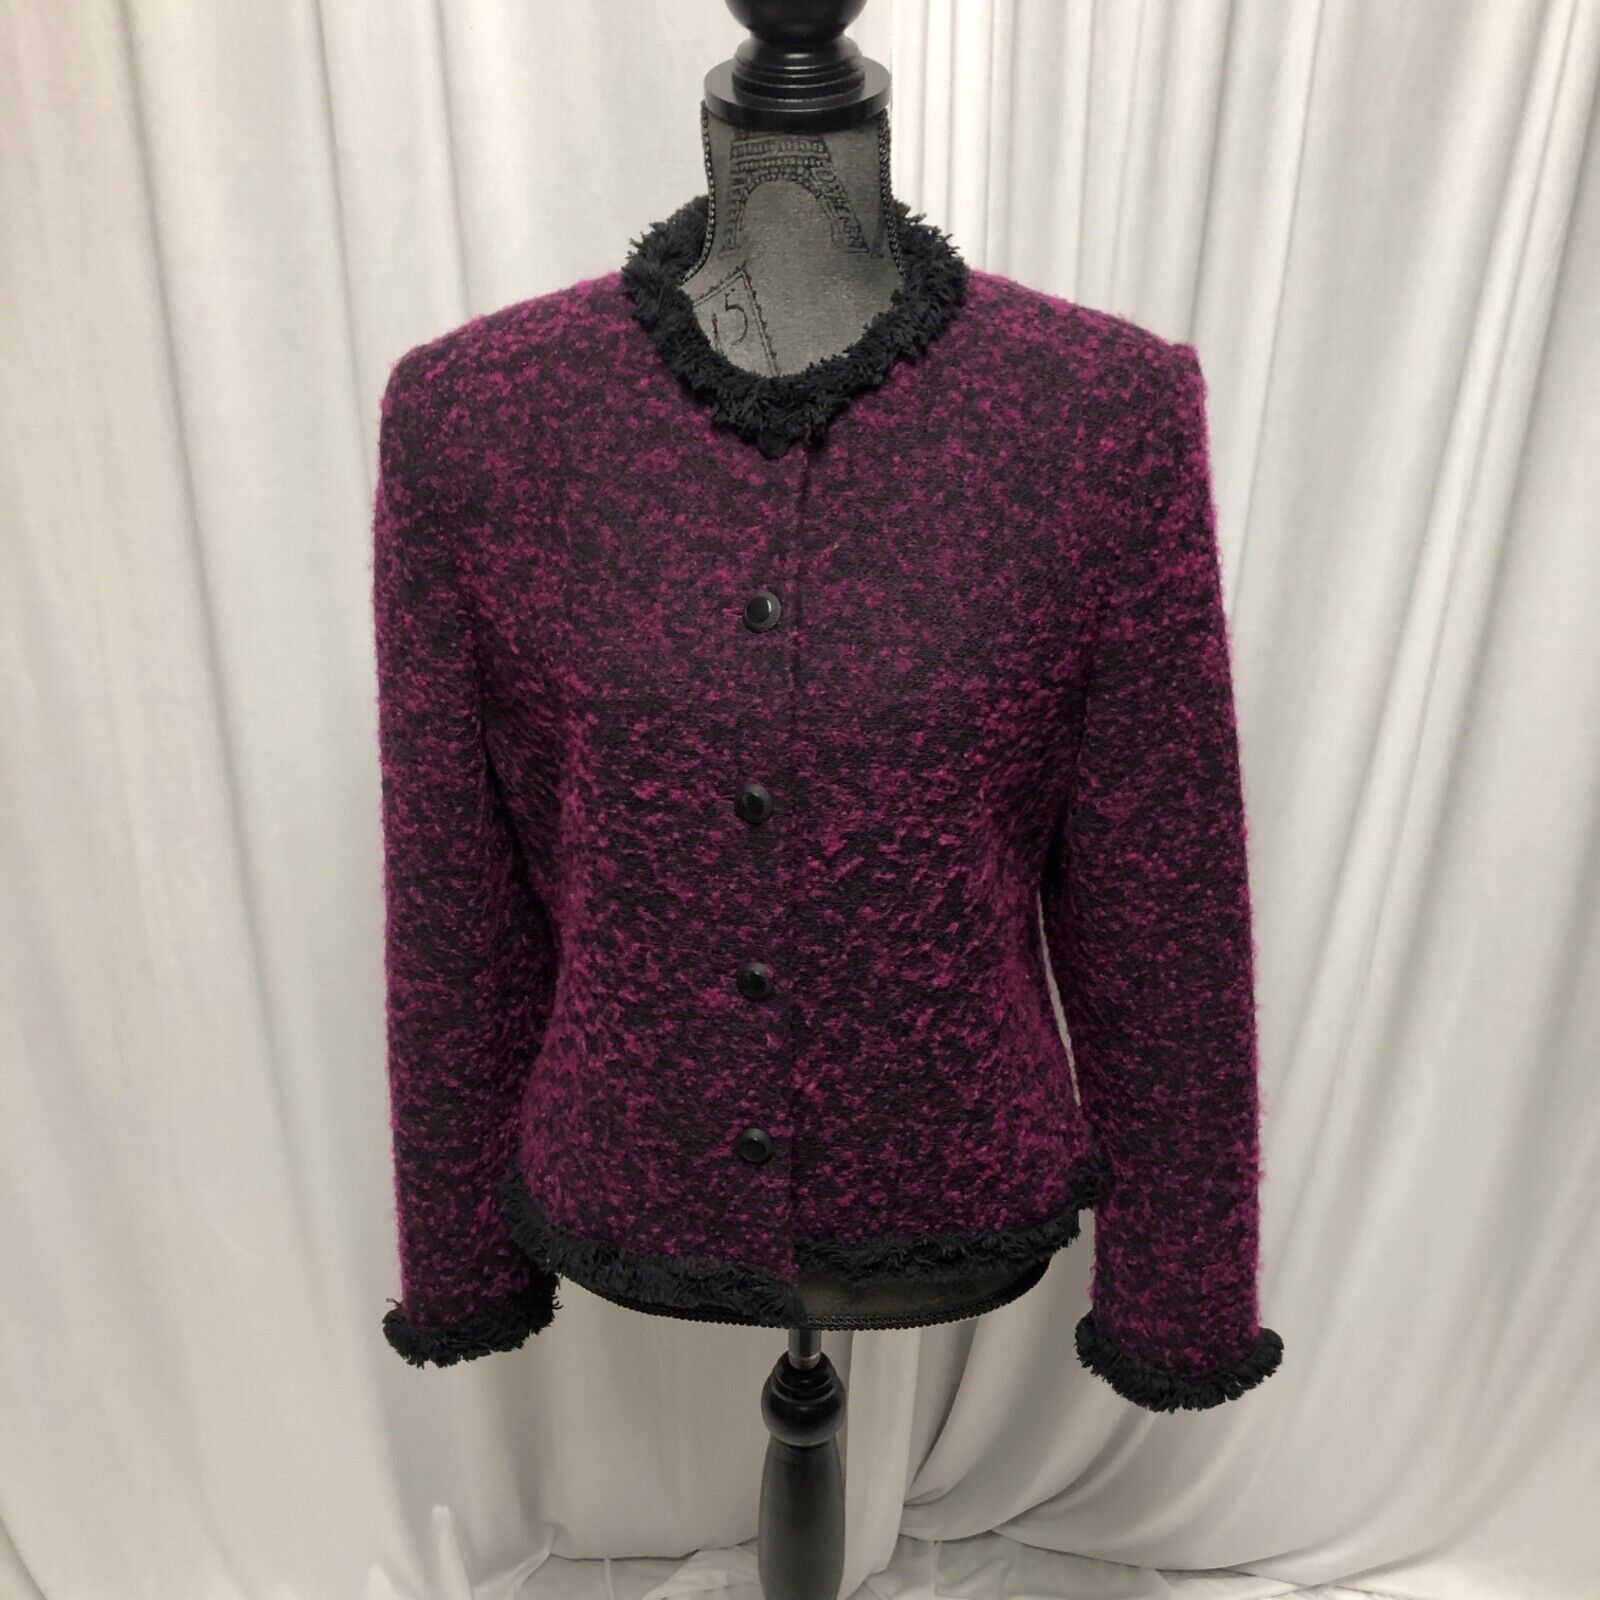 Primary image for Bridgetown Collection Jacket Womens 12 Button Up Purple Black Lined Blazer